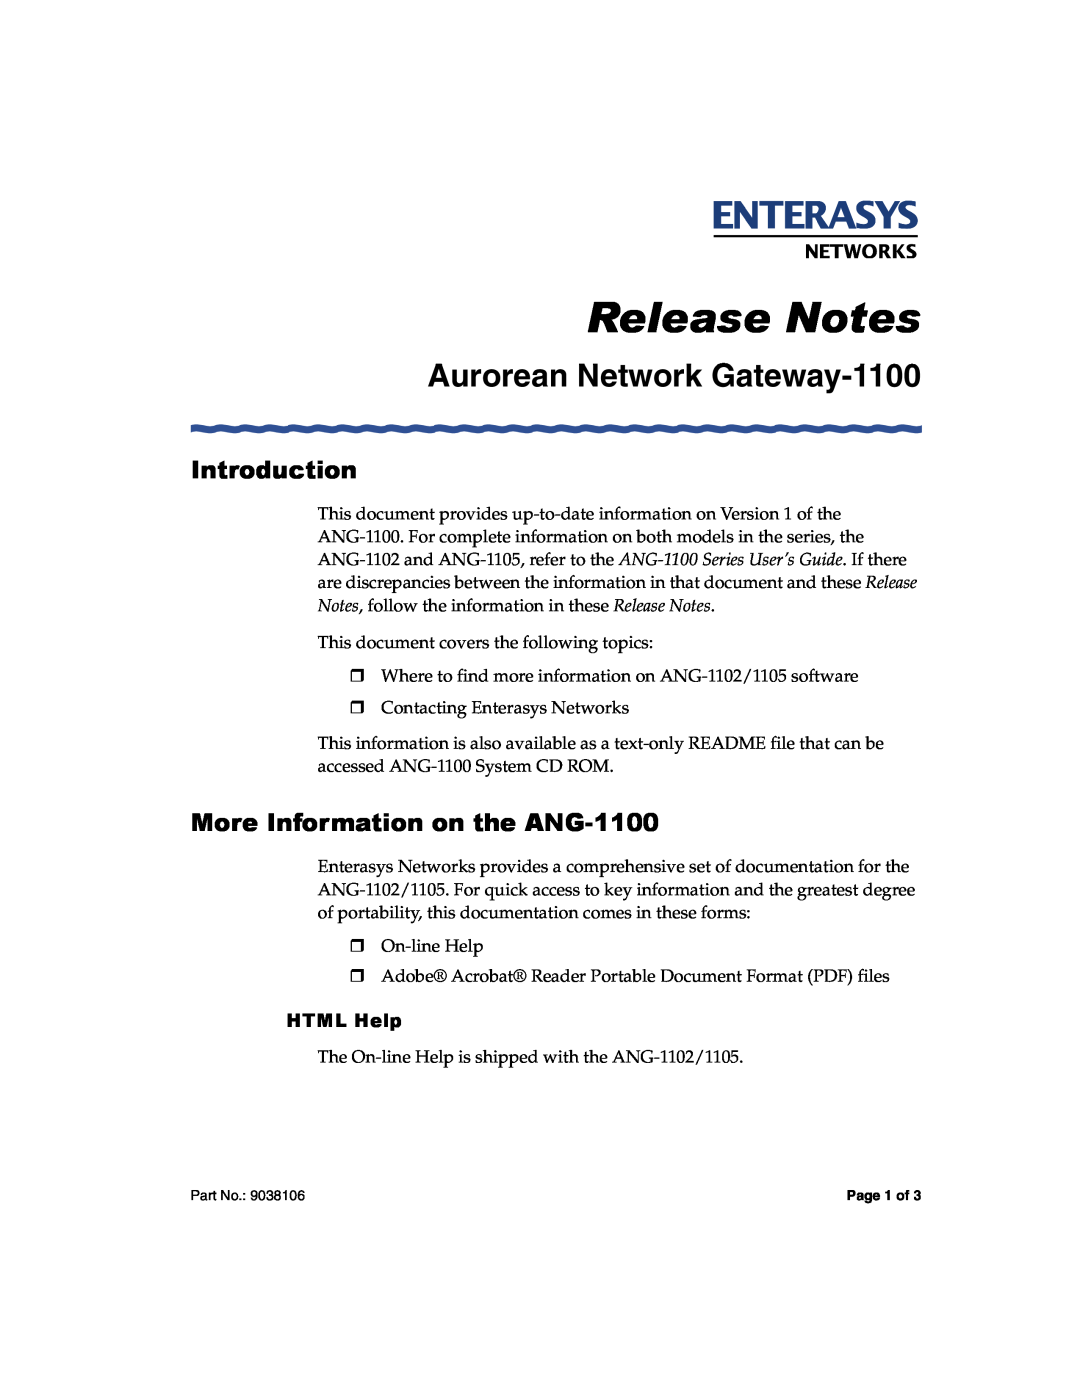 Enterasys Networks 1100 Series manual Introduction, More Information on the ANG-1100, HTML Help, Release Notes 